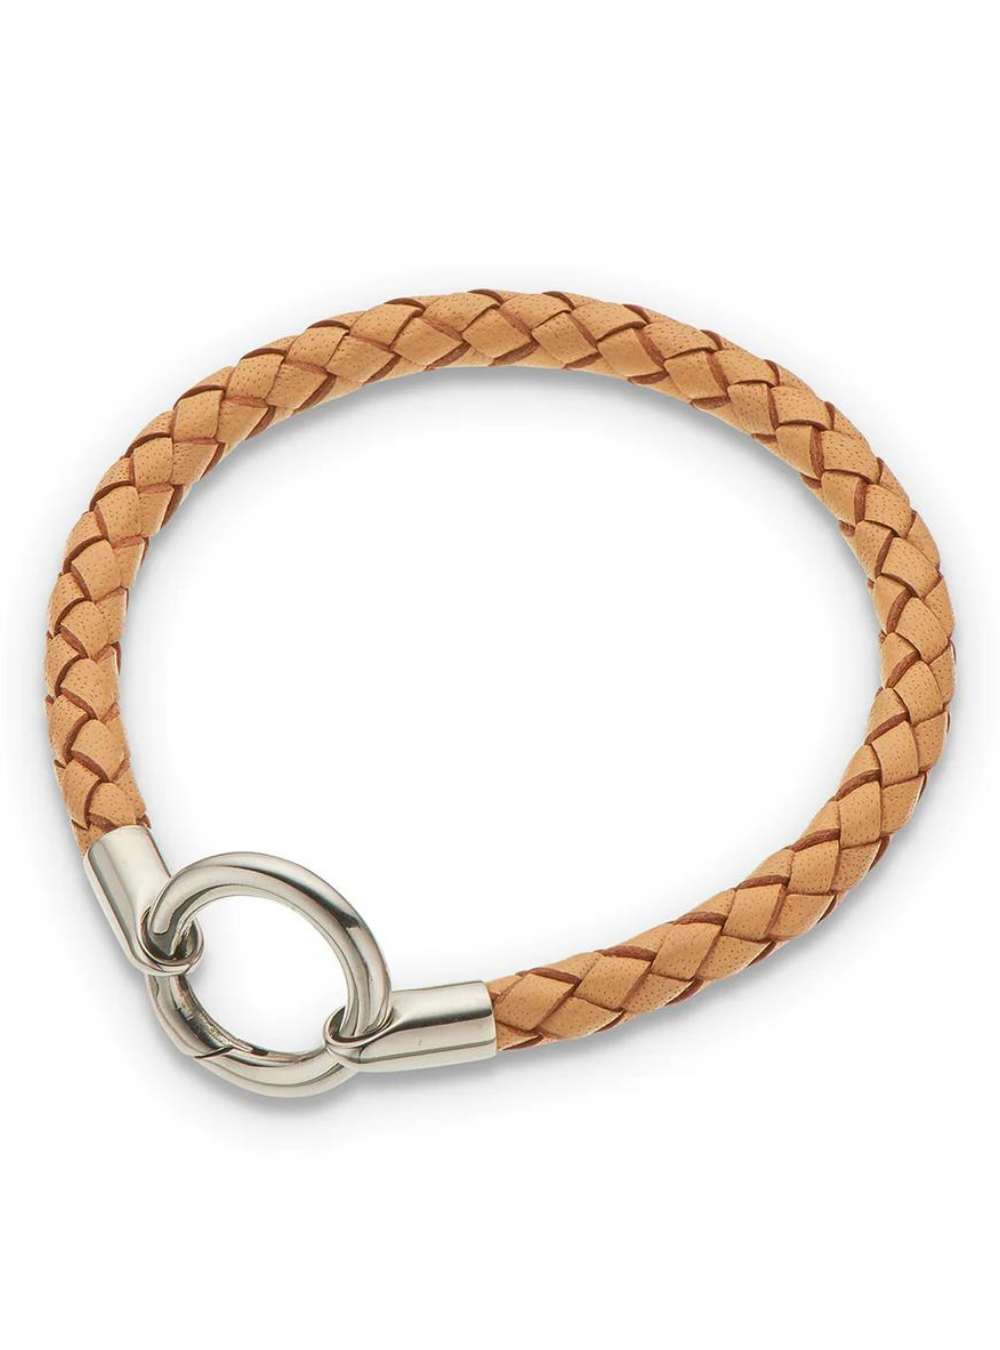 Natural Round Thick Plaited Leather Bracelet